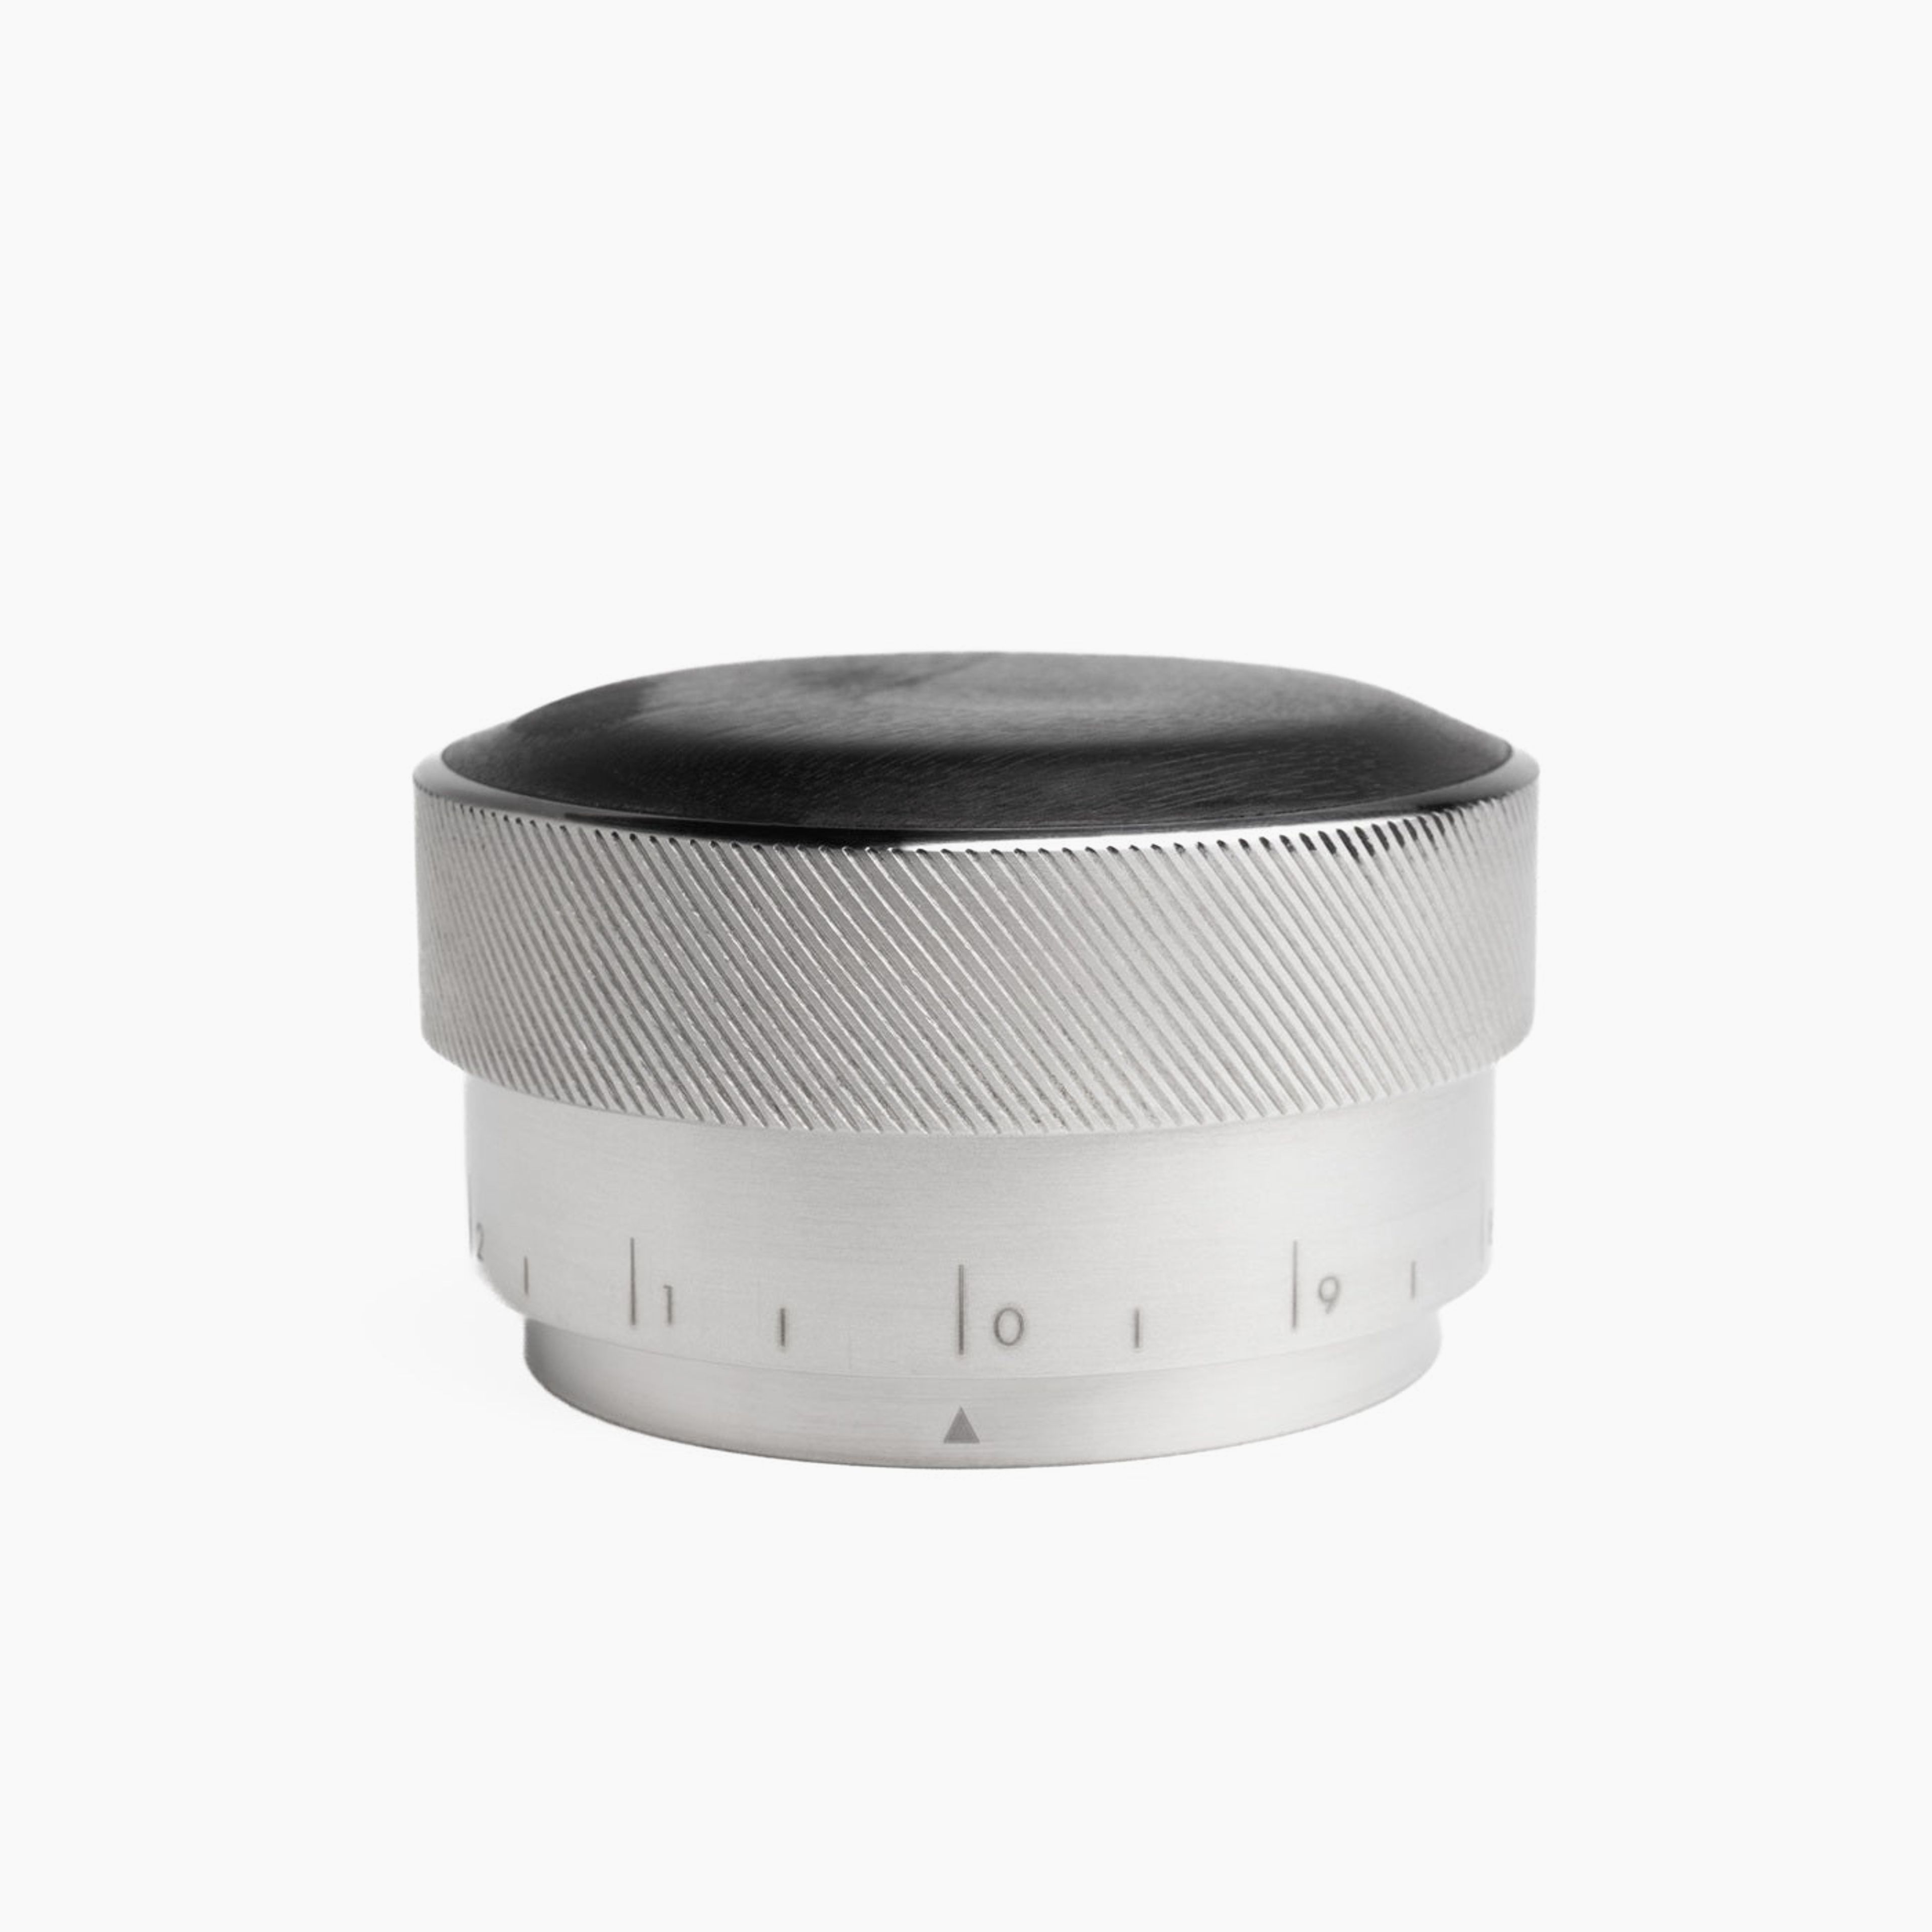 The New Levy Precision Espresso Tamping Tool